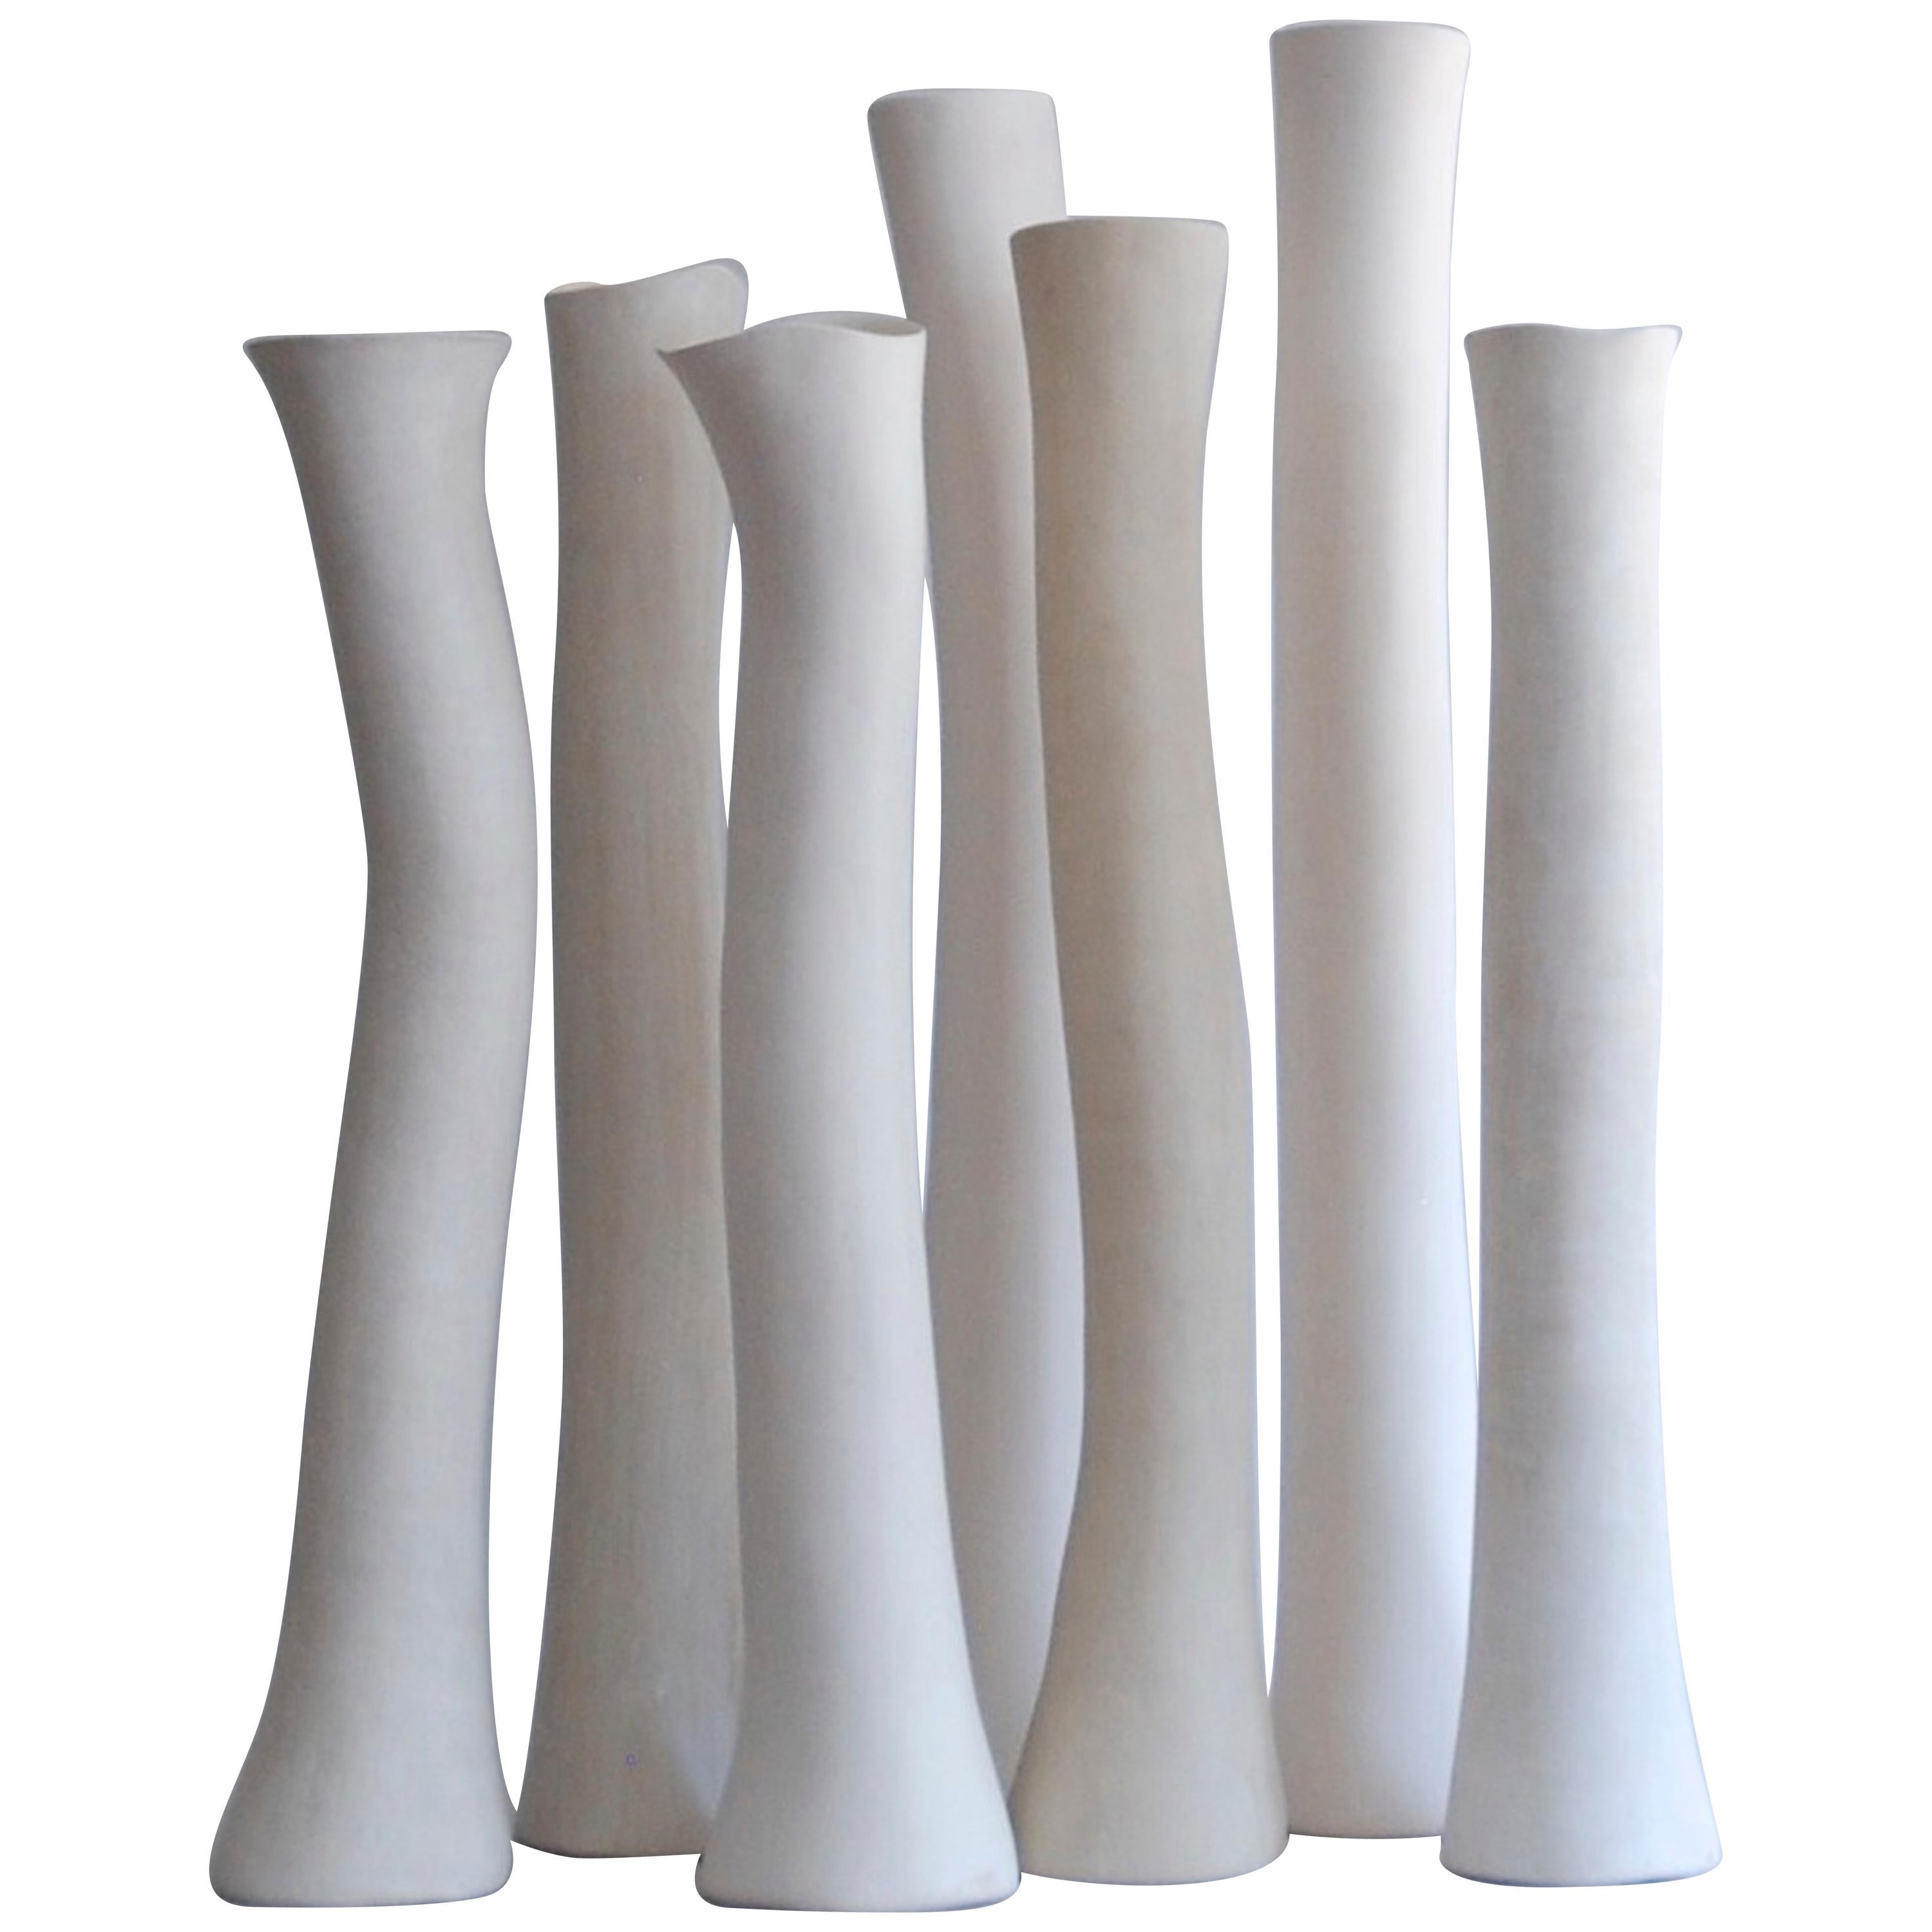 Tall Arcing Ceramic Vase, White Glaze with Brown Edge, Hand Built 5